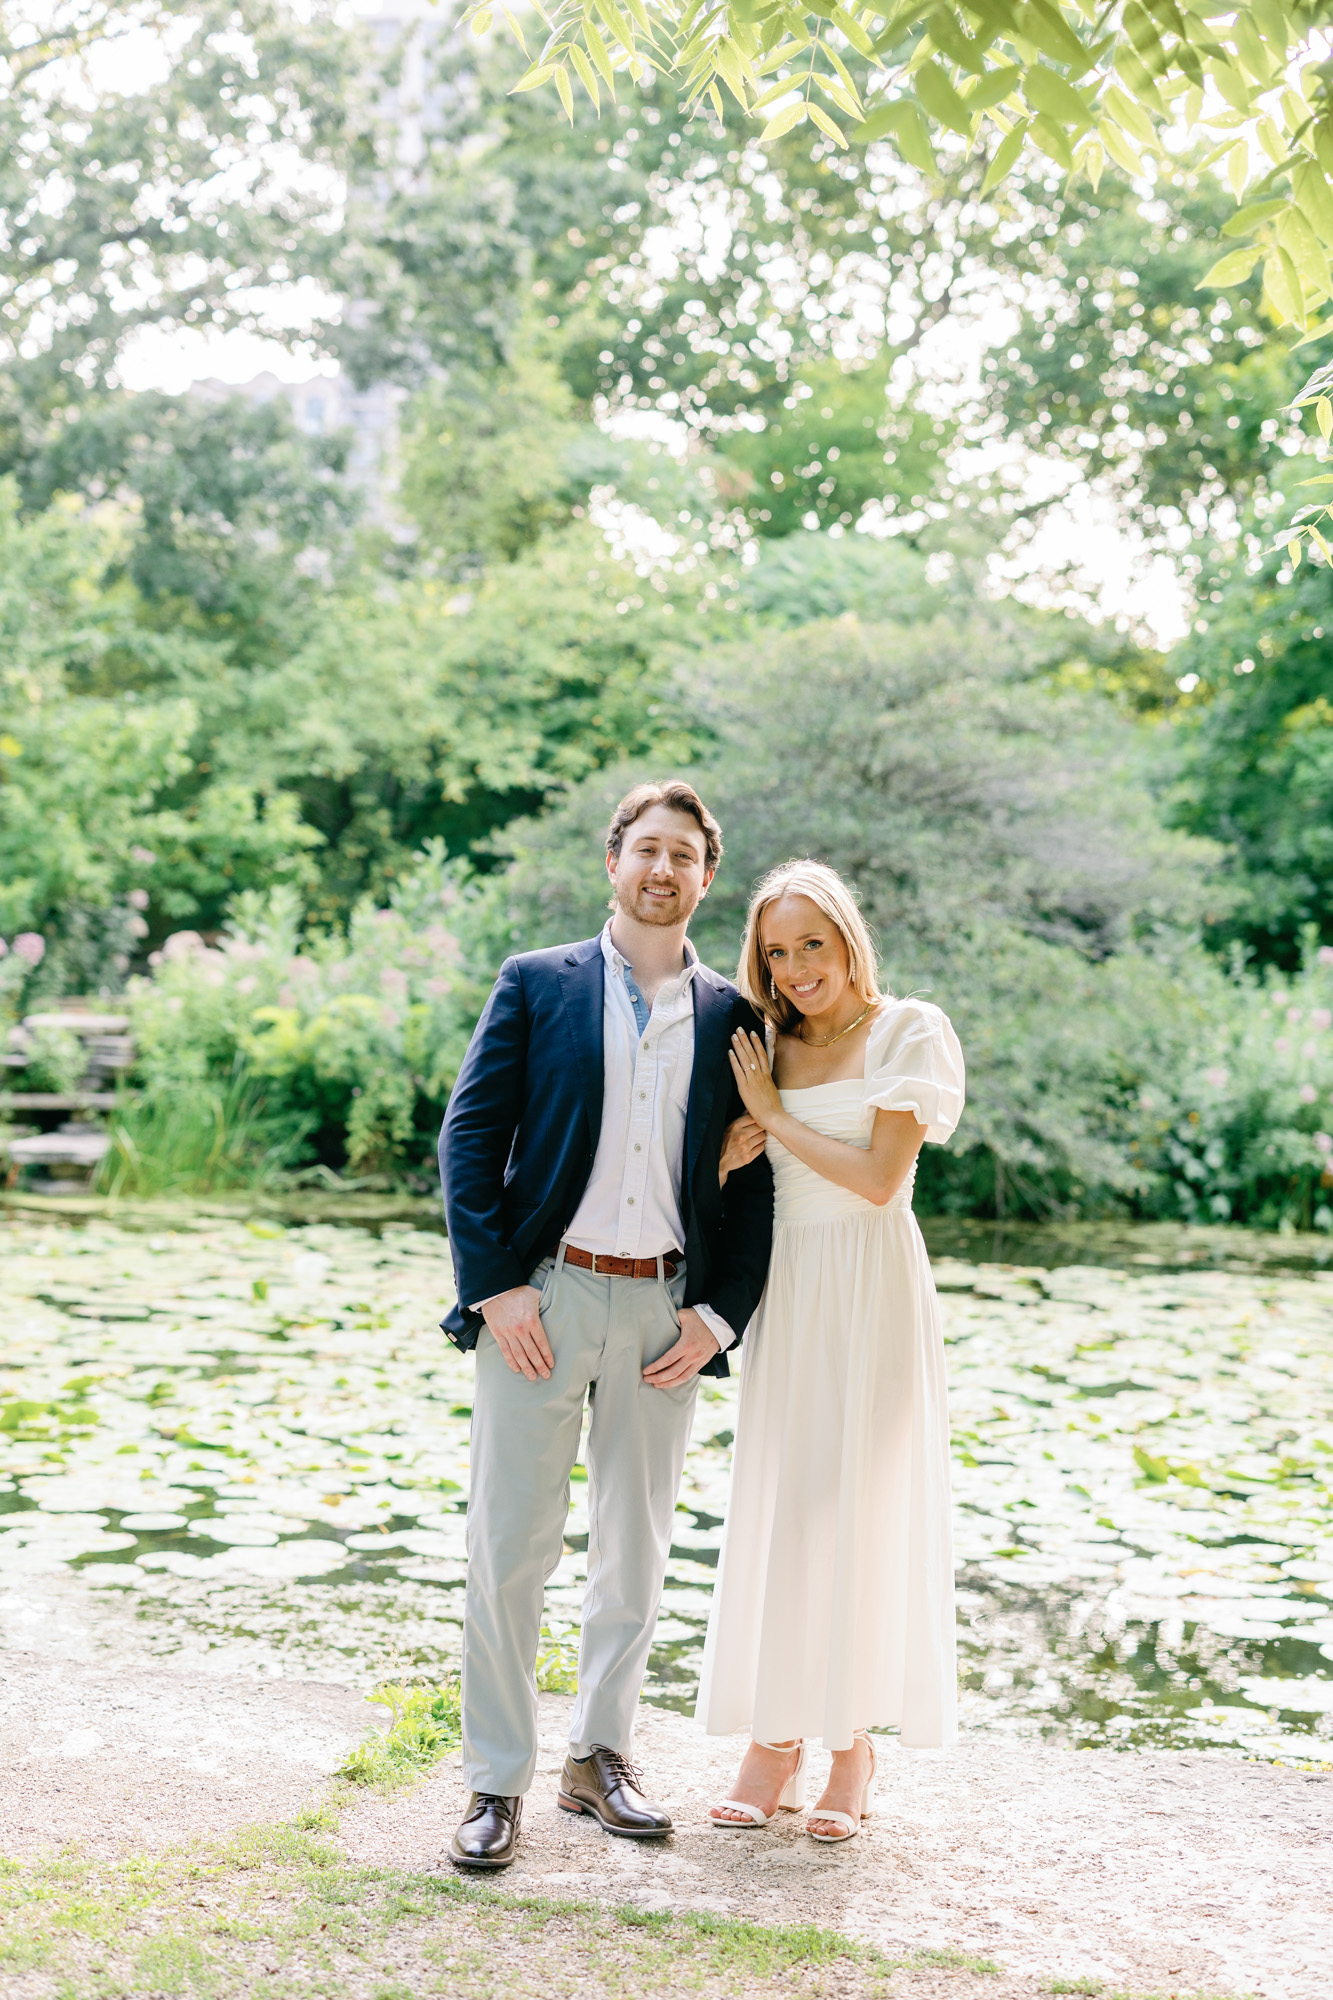 An engagement photo taken in Alfred Caldwell Lily Pool.